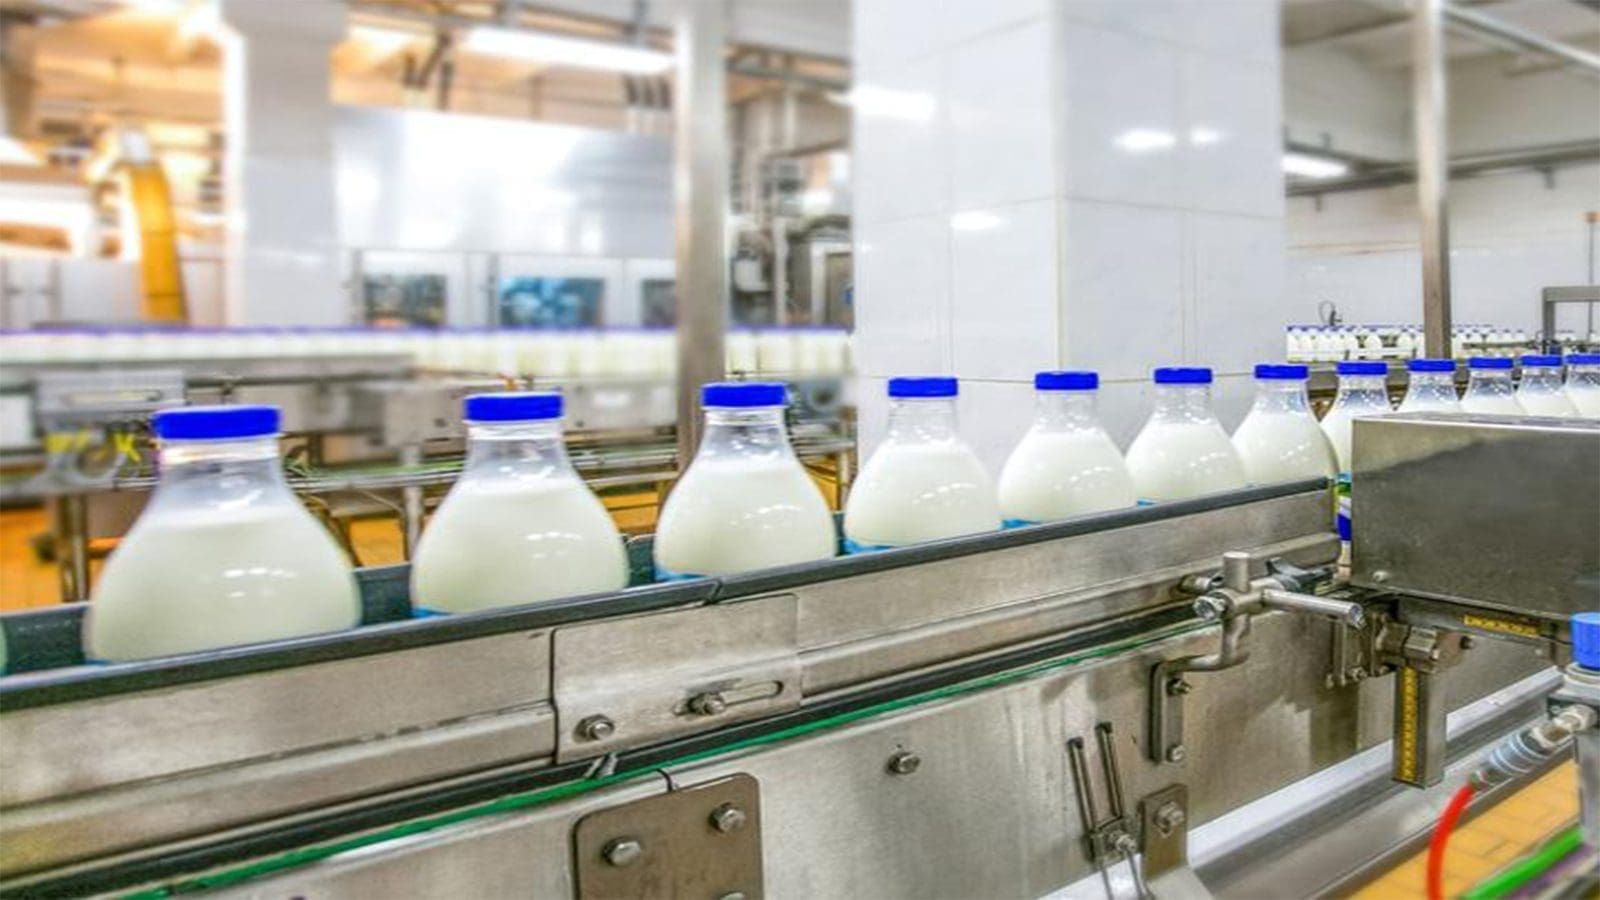 Tanzania Bureau of Standards urges milk producers to up quality of goods